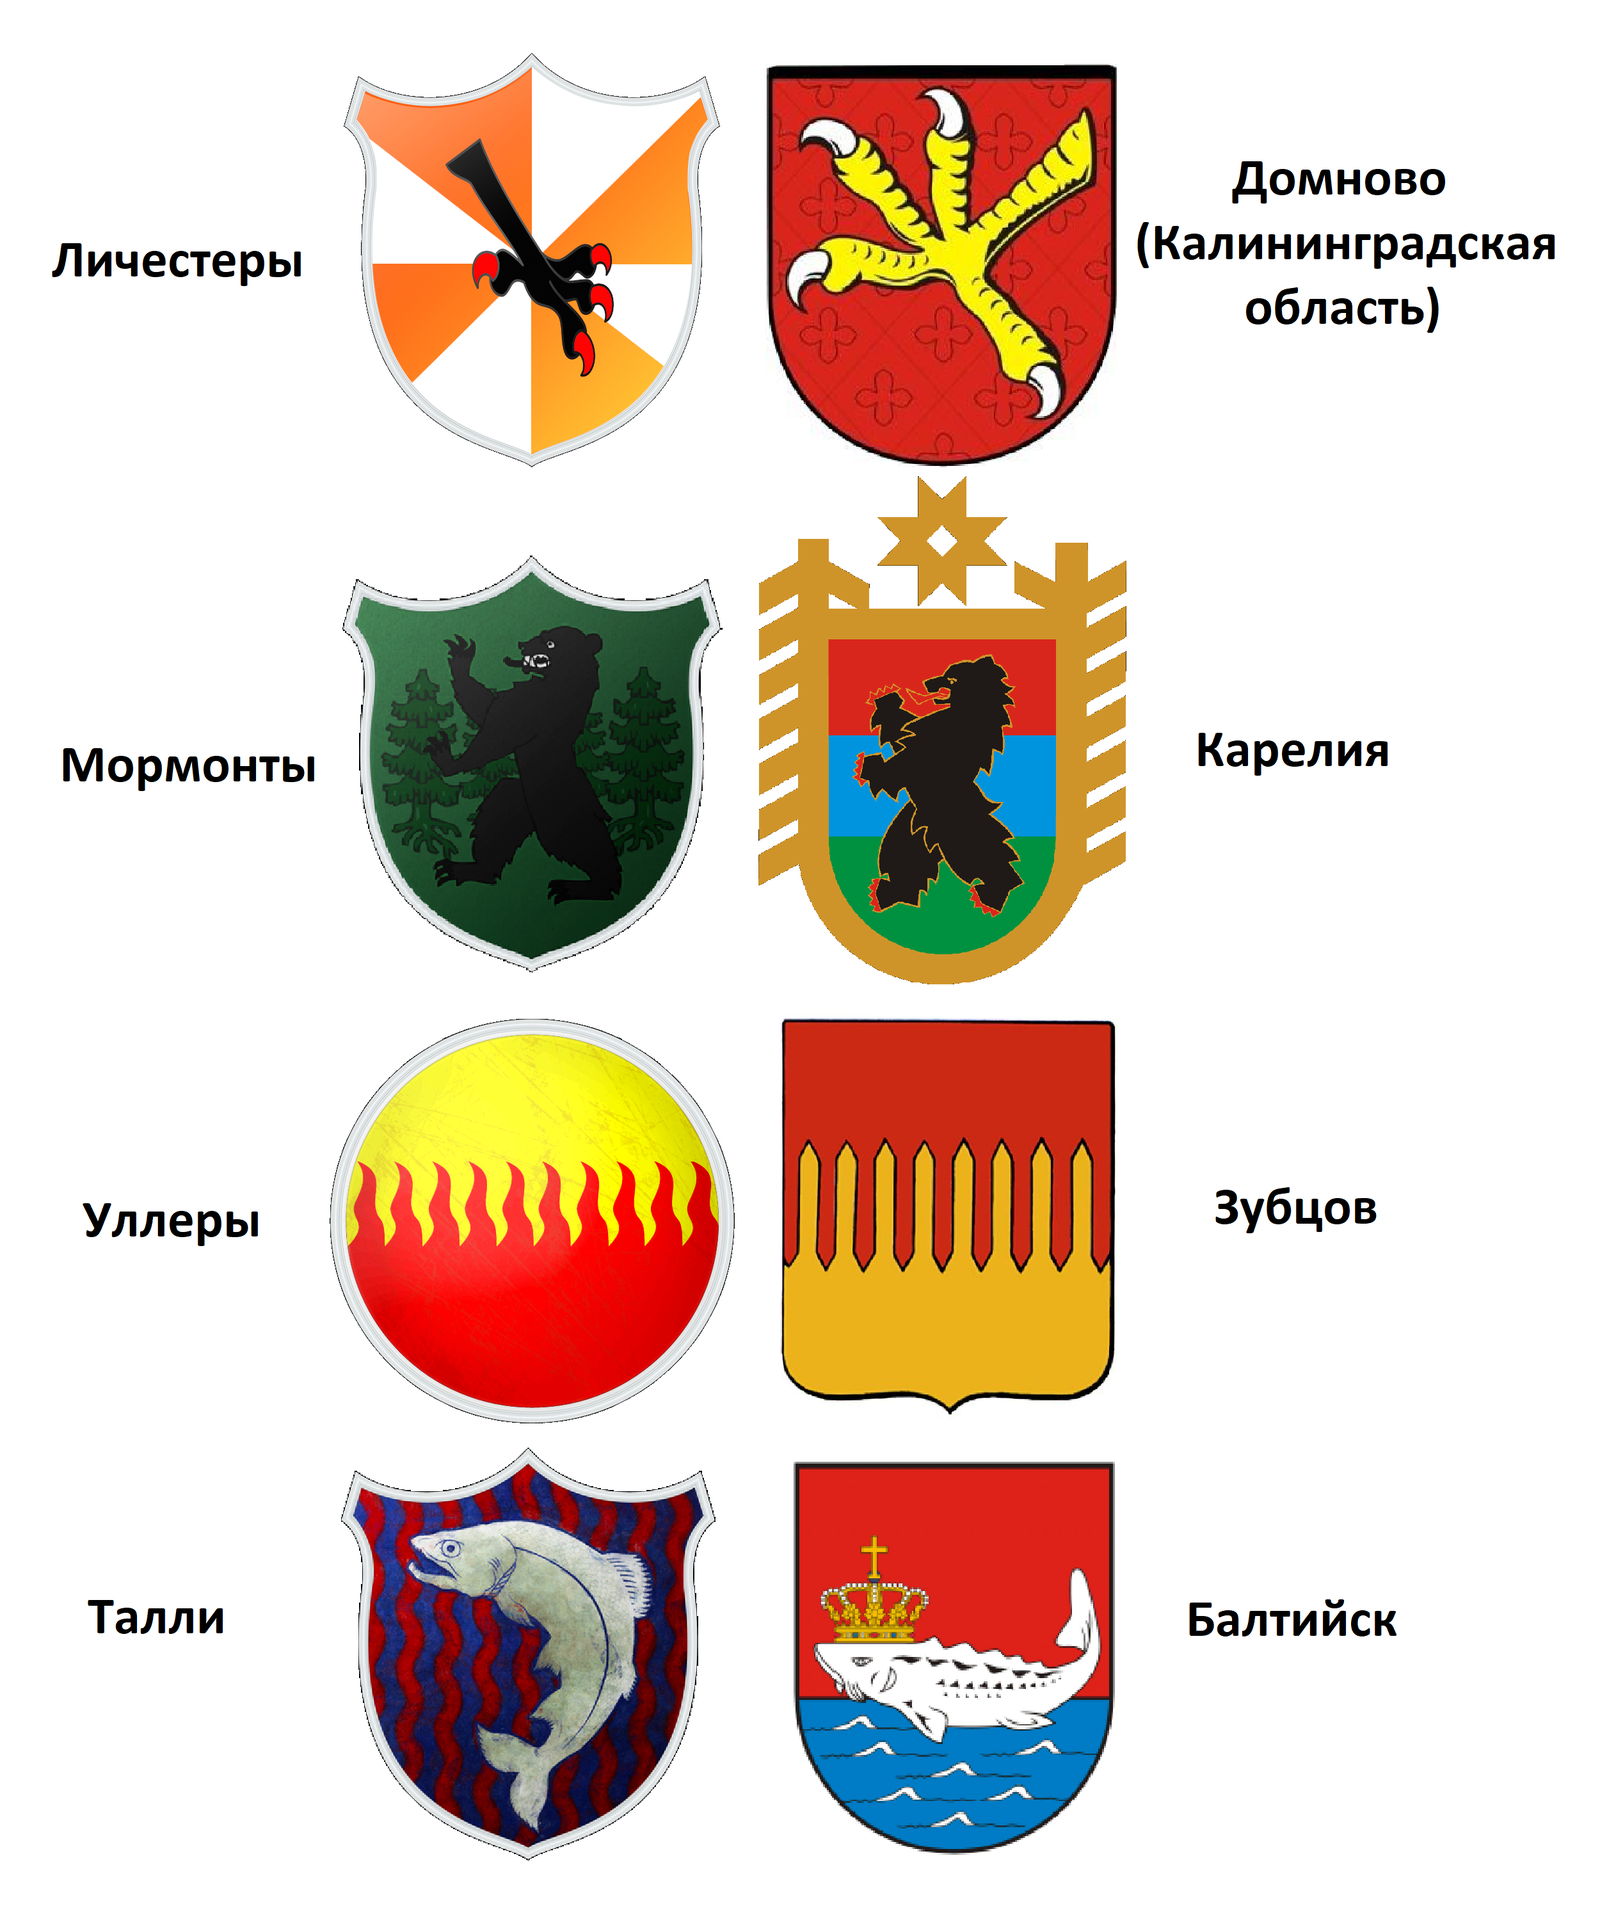 Coats of arms of Westeros vs coats of arms of Russia 2 - PLIO, Game of Thrones, Westeros, Russia, Cities of Russia, Coat of arms, Heraldry, Longpost